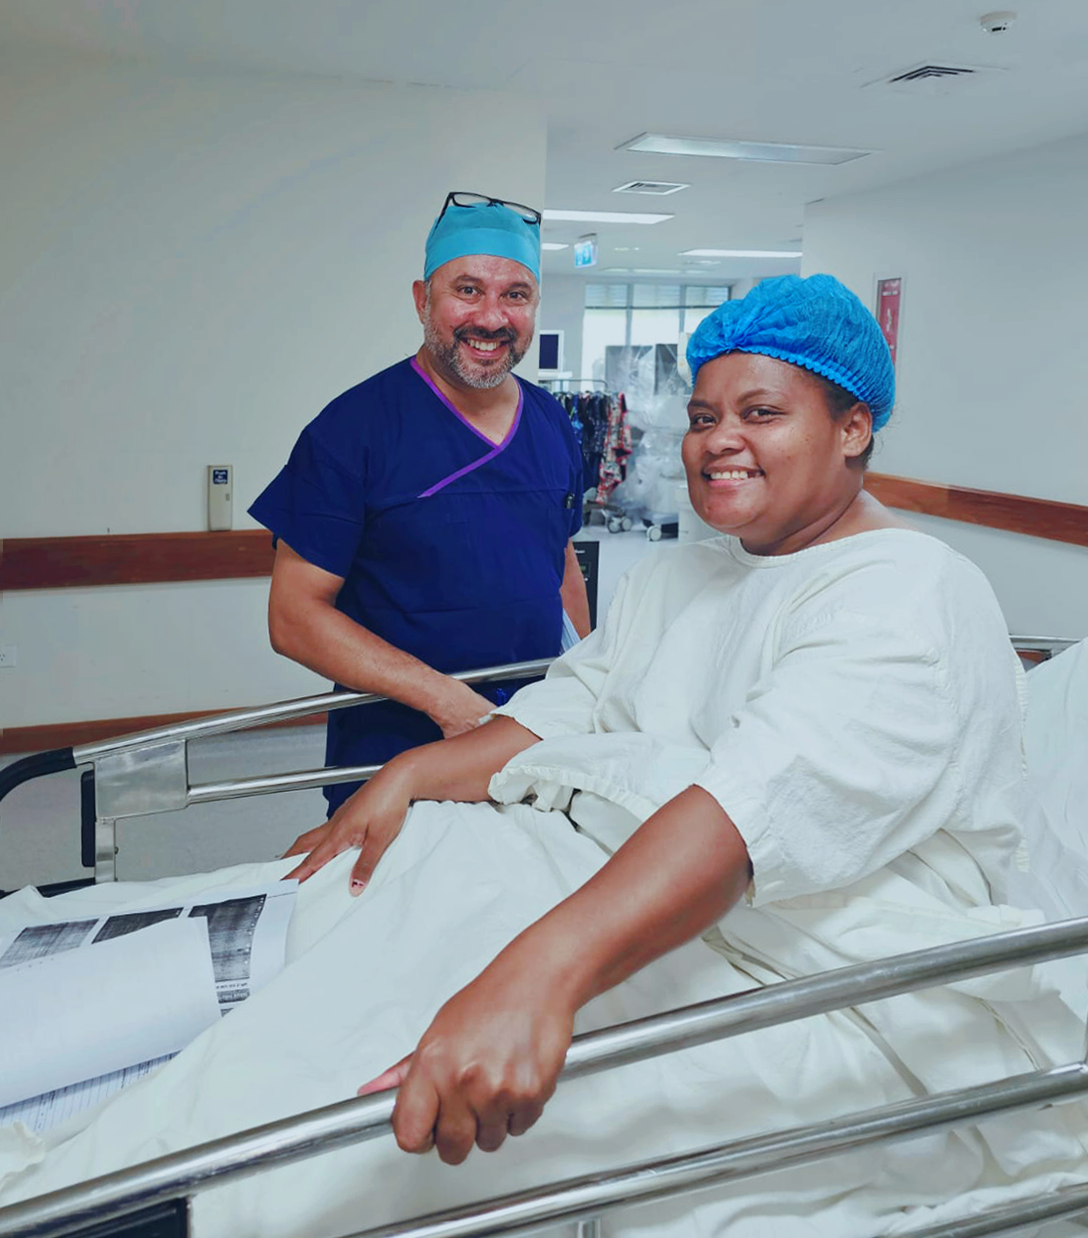 A person in a hospital gown sits up in their hospital bed. She smiles for a photo with a staff member in surgical scrubs.